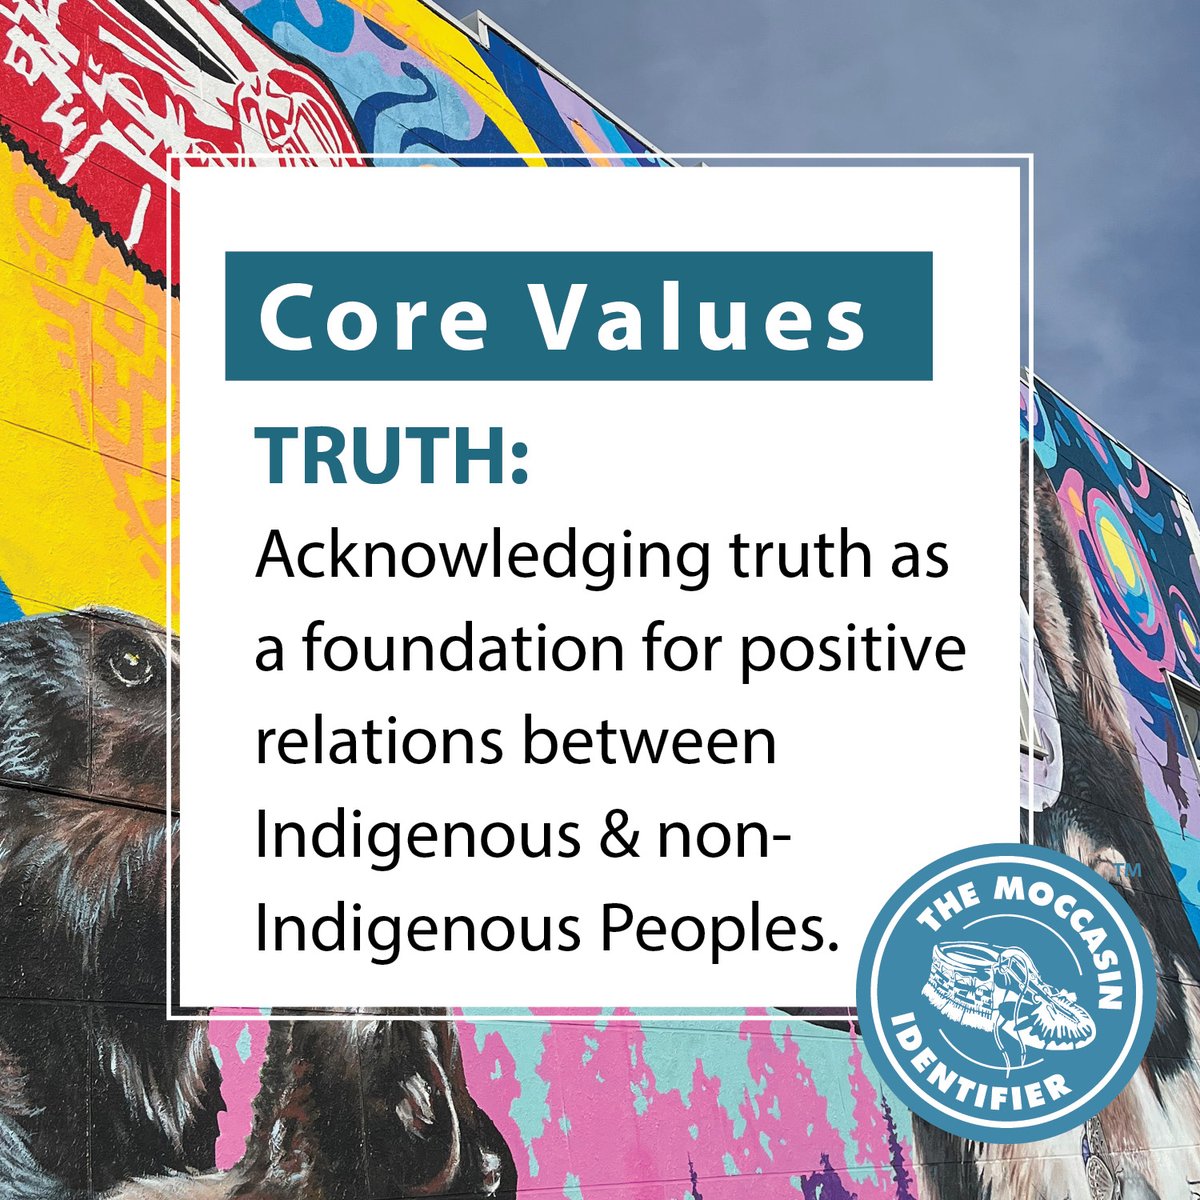 'Acknowledging Truth as a foundation for reconciliation between Indigenous and non-Indigenous Peoples' emphasizes the vital role that truth plays in fostering healing, understanding, and collaboration between these two communities. #truthandreconciliation #CoverCanadaInMoccasins